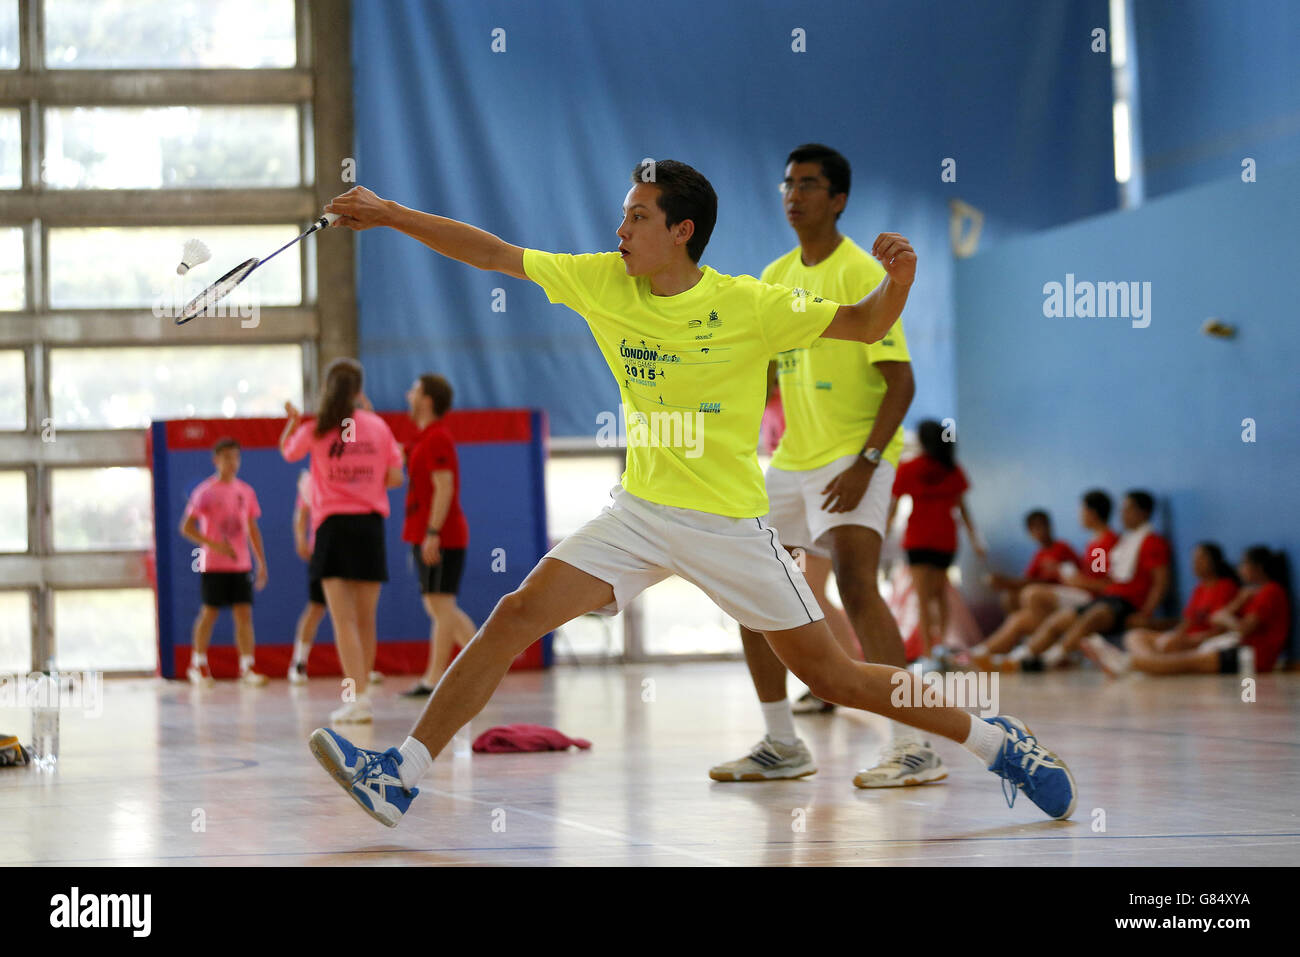 Athletics - 2015 London Youth Games - Day Three - Crystal Palace. Action from the badminton section during day 3 of the 2015 London Youth Games at Crystal Palace. Stock Photo